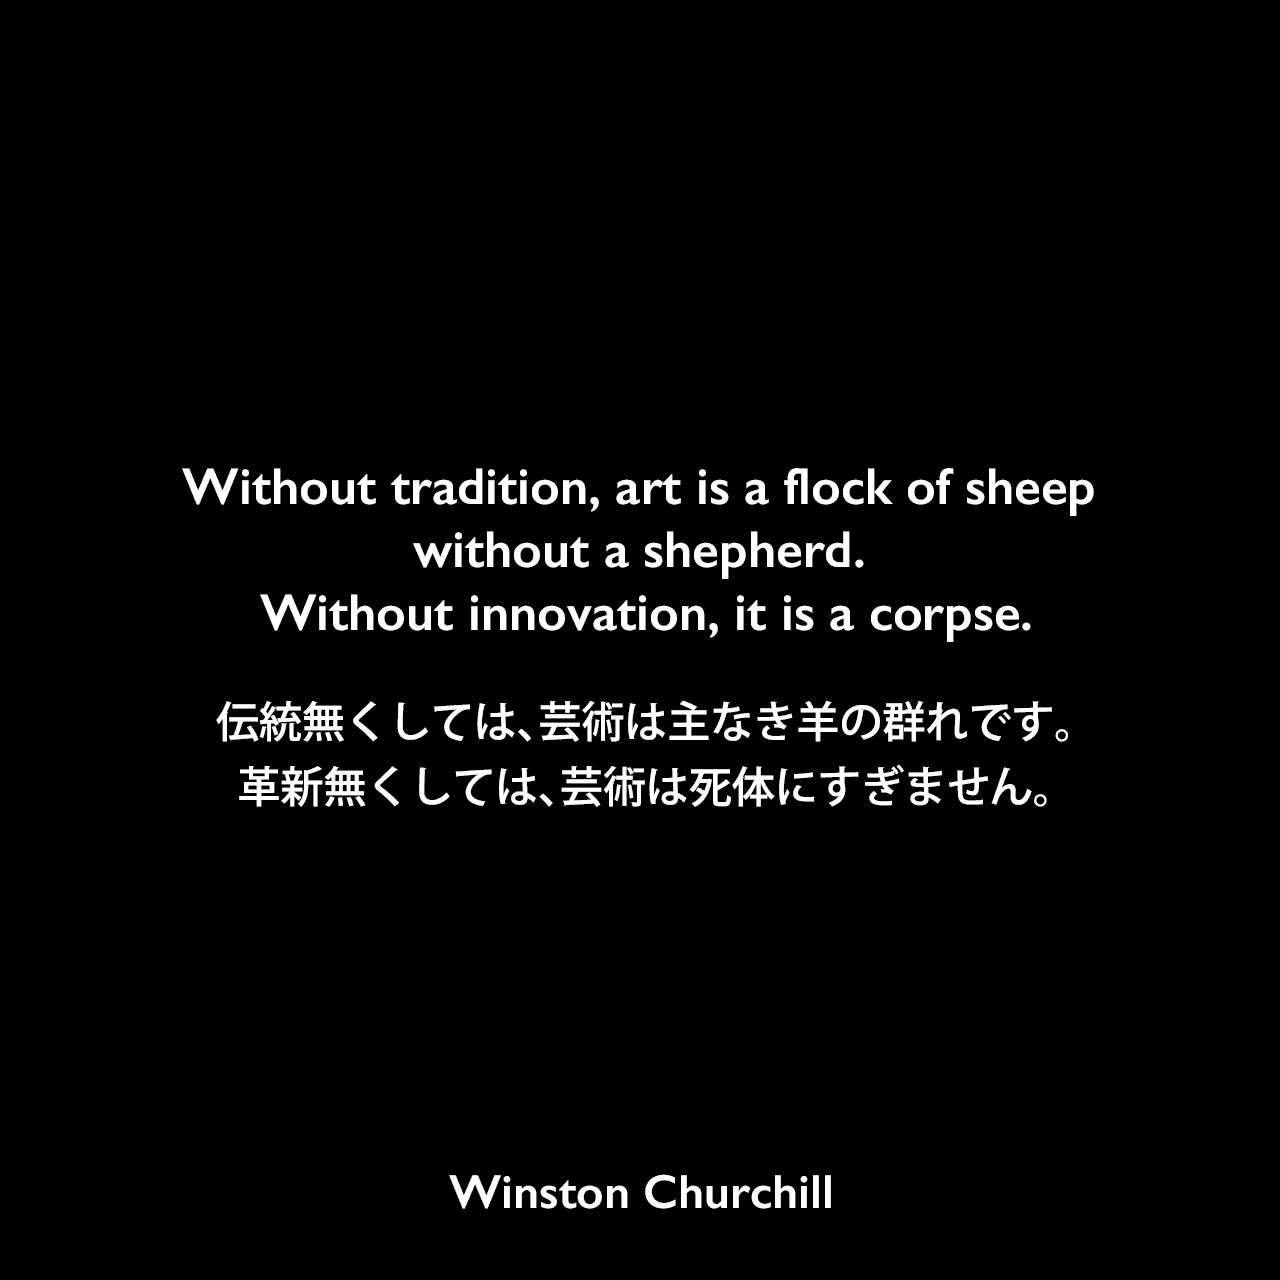 Without tradition, art is a flock of sheep without a shepherd. Without innovation, it is a corpse.伝統無くしては、芸術は主なき羊の群れです。革新無くしては、芸術は死体にすぎません。- 1953年、Royal Academy of ArtでのスピーチよりWinston Churchill